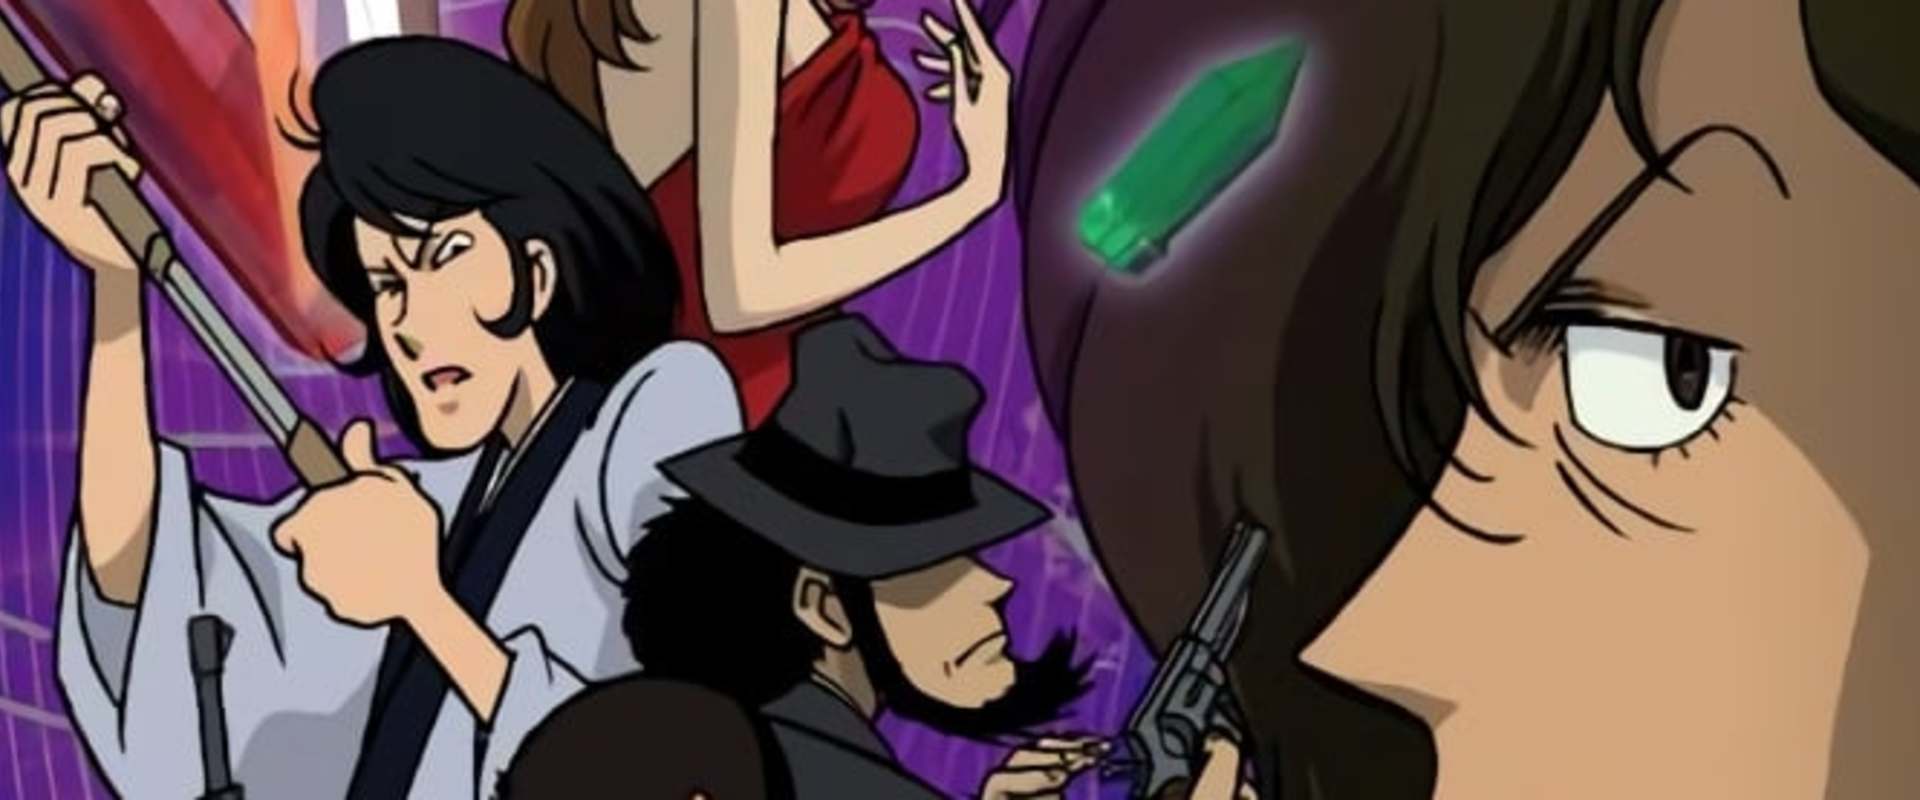 Lupin the Third: Return of Pycal background 1